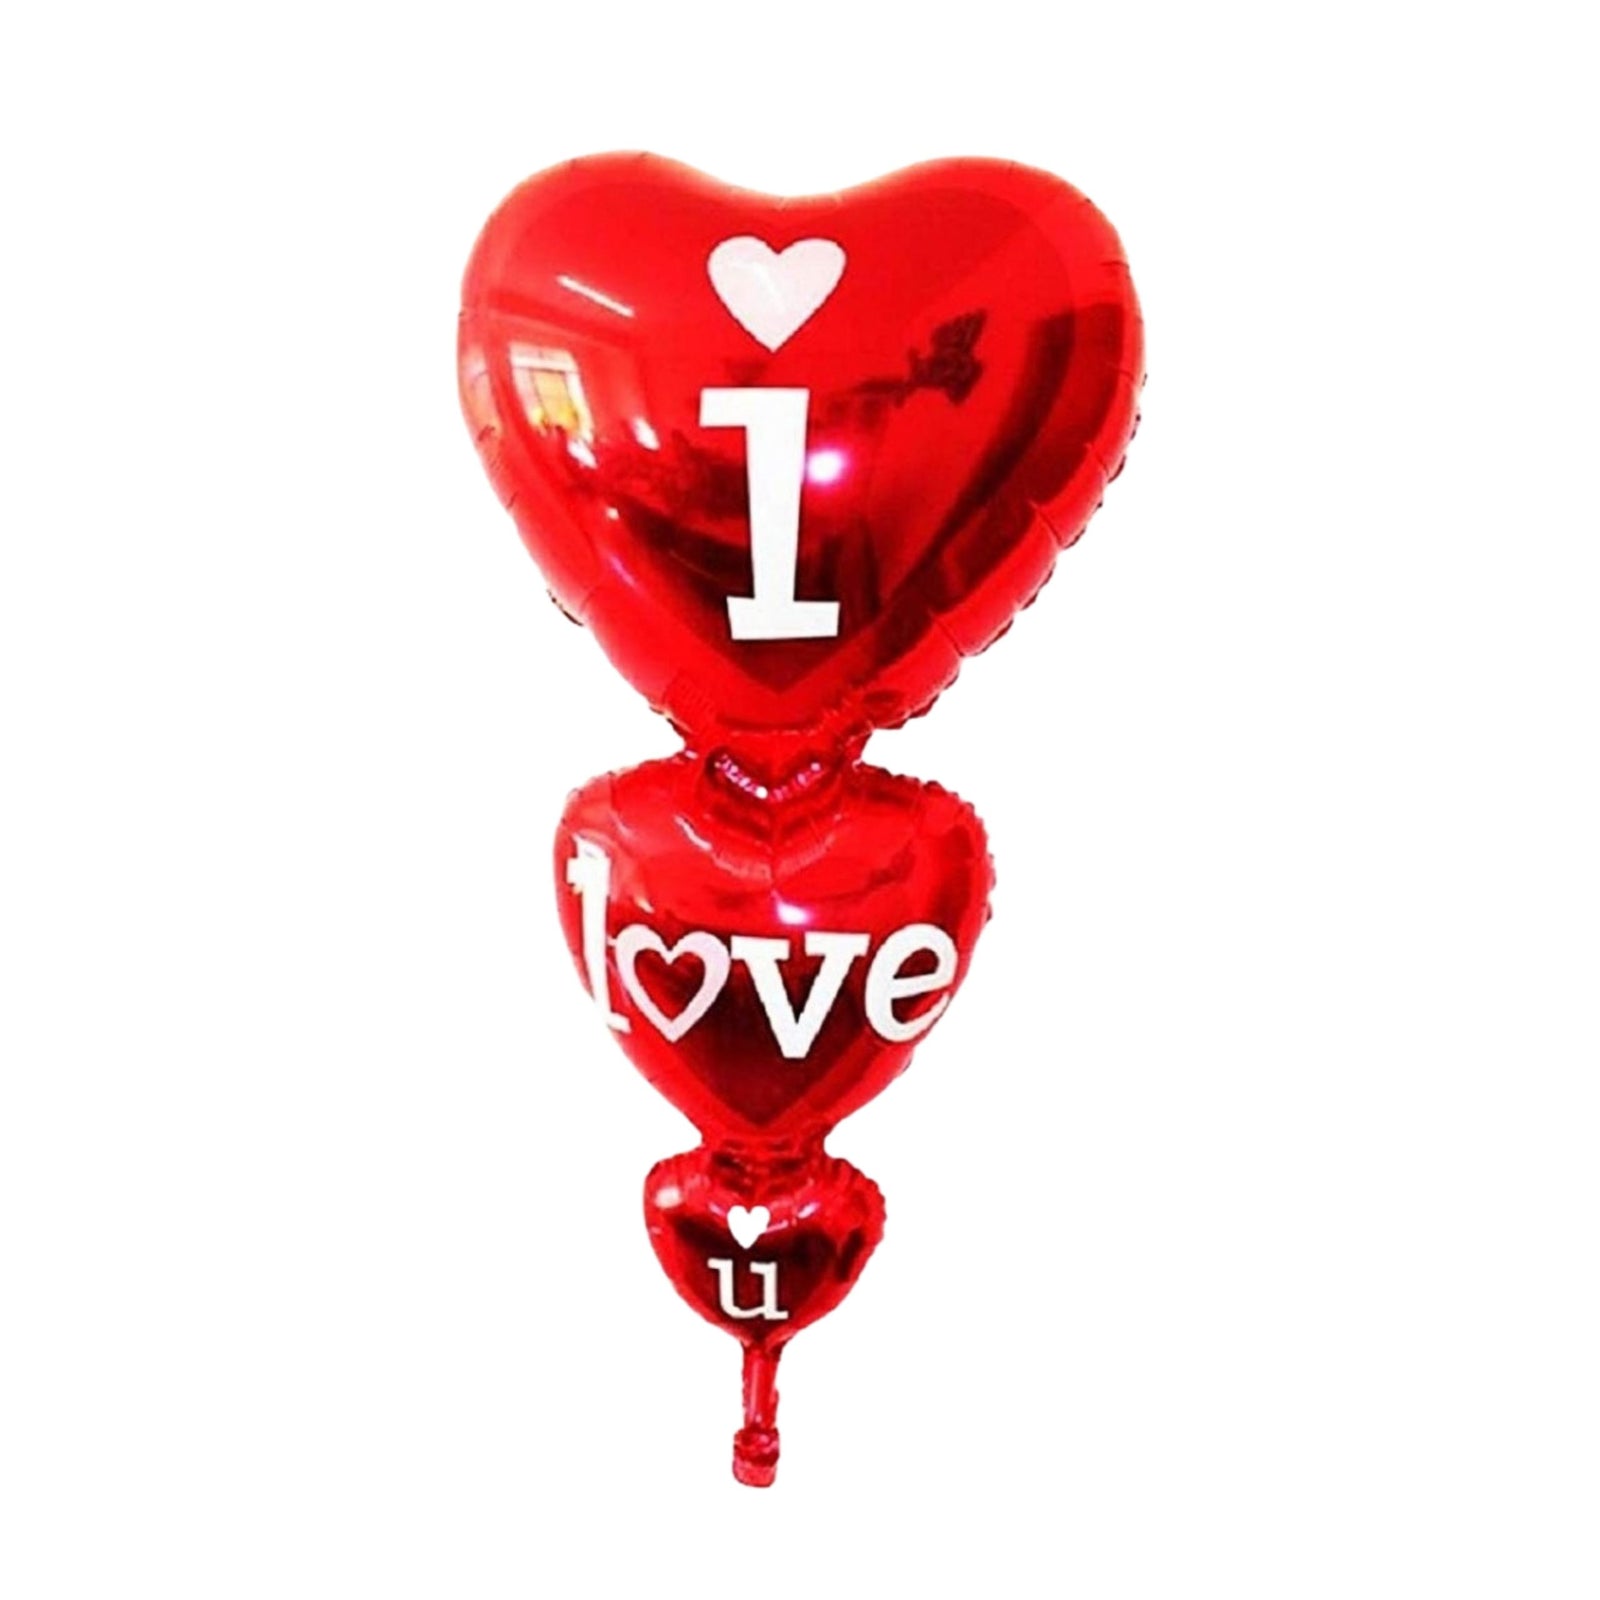 I Love You Foil Balloons Heart Shape for Wedding Engagement Valentine's Day Anniversary Birthday Party Decoration